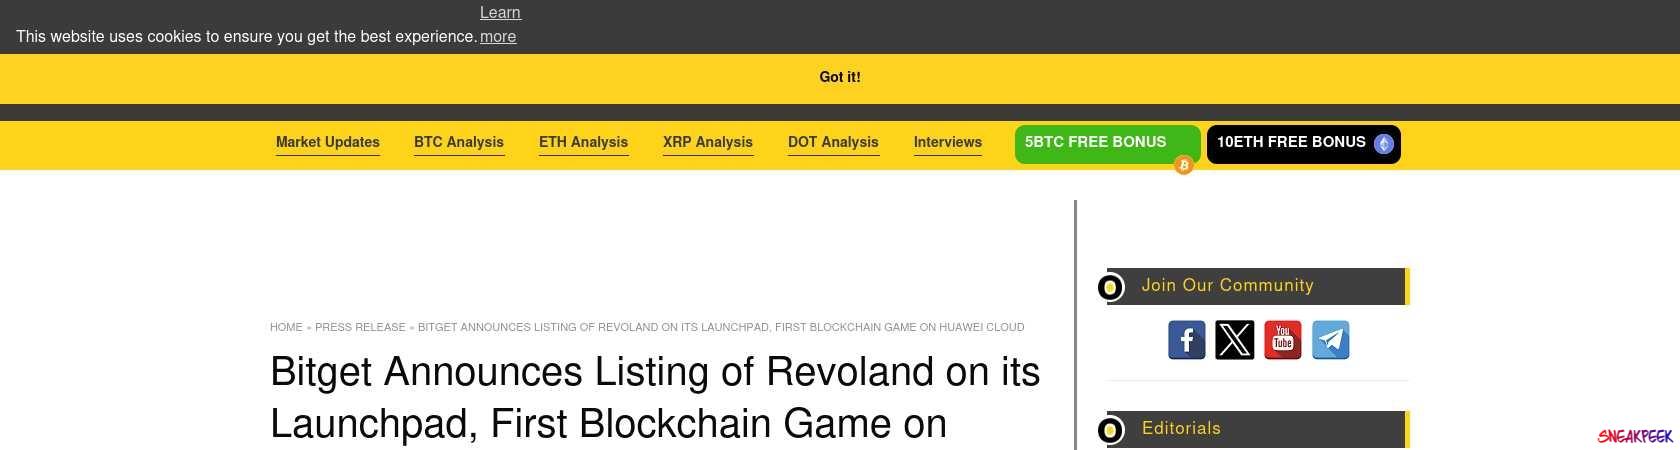 Read the full Article:  ⭲ Bitget Announces Listing of Revoland on its Launchpad, First Blockchain Game on Huawei Cloud